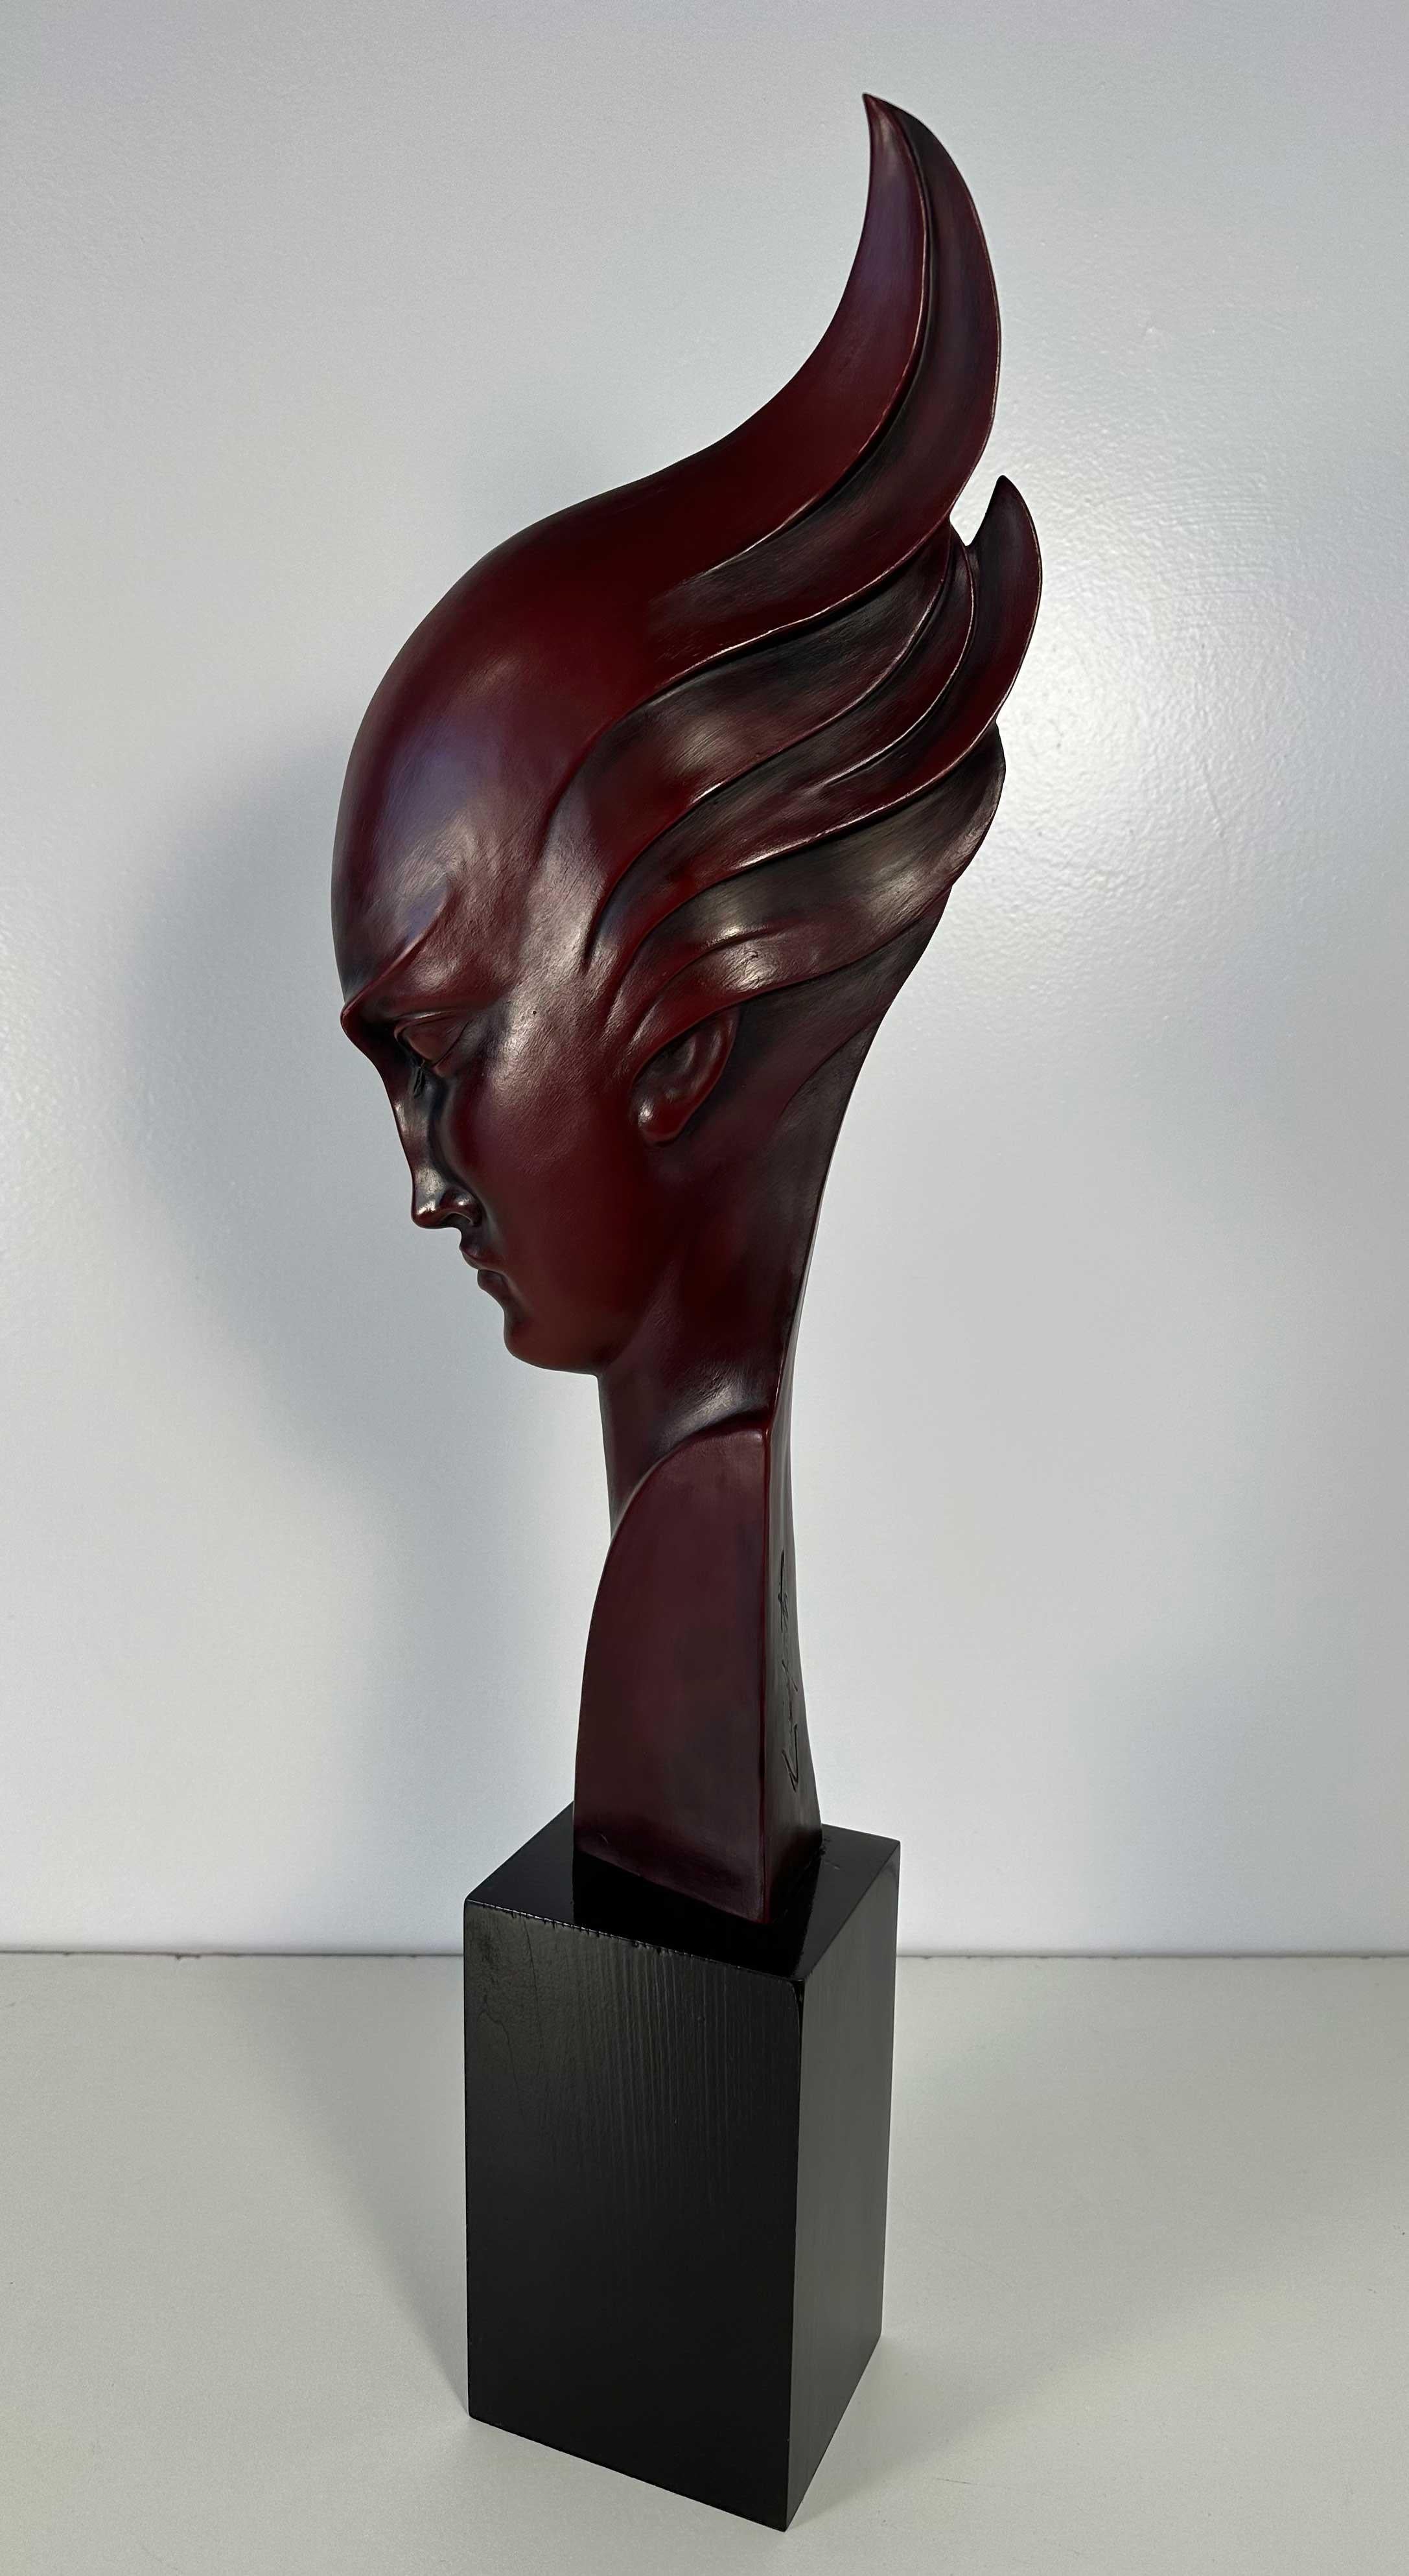 This Art Deco sculpture was produced in Italy and more precisely in Milan, by Guido Cacciapuoti in the 1930s. 

The base is in ebonized wood and the sculpture, a typical Art Deco stylized woman profile face, is in in red porcelain stoneware.

On the